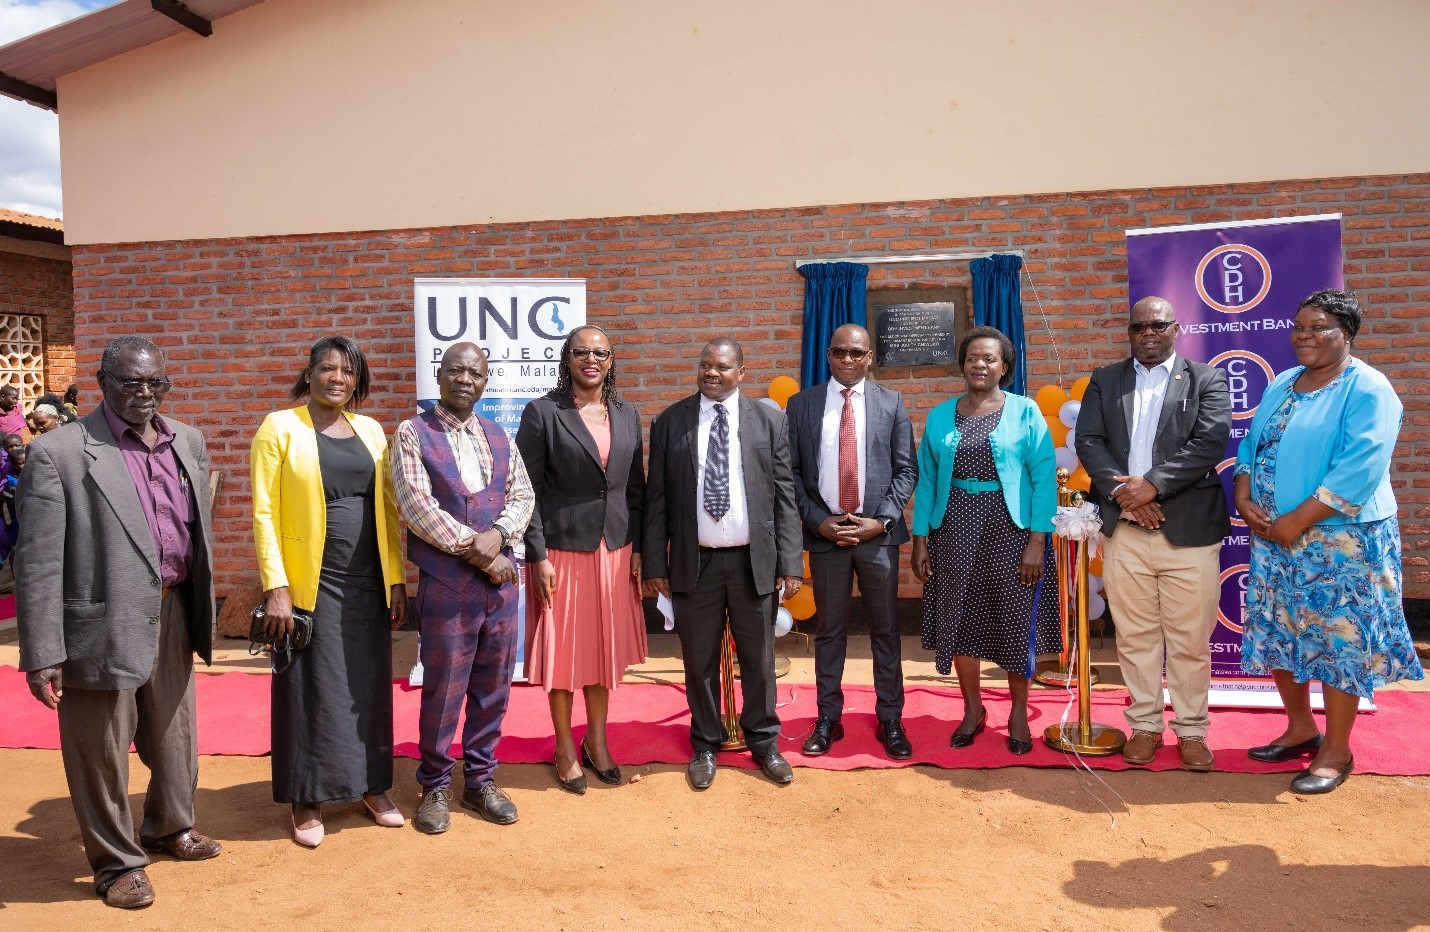 Representatives from Dzama community, UNC Project Malawi, CDH Investment Bank pose with the Guest of Honor Mrs Judith Chiwoko (3rd right) after unveiling the school block building plaque. 